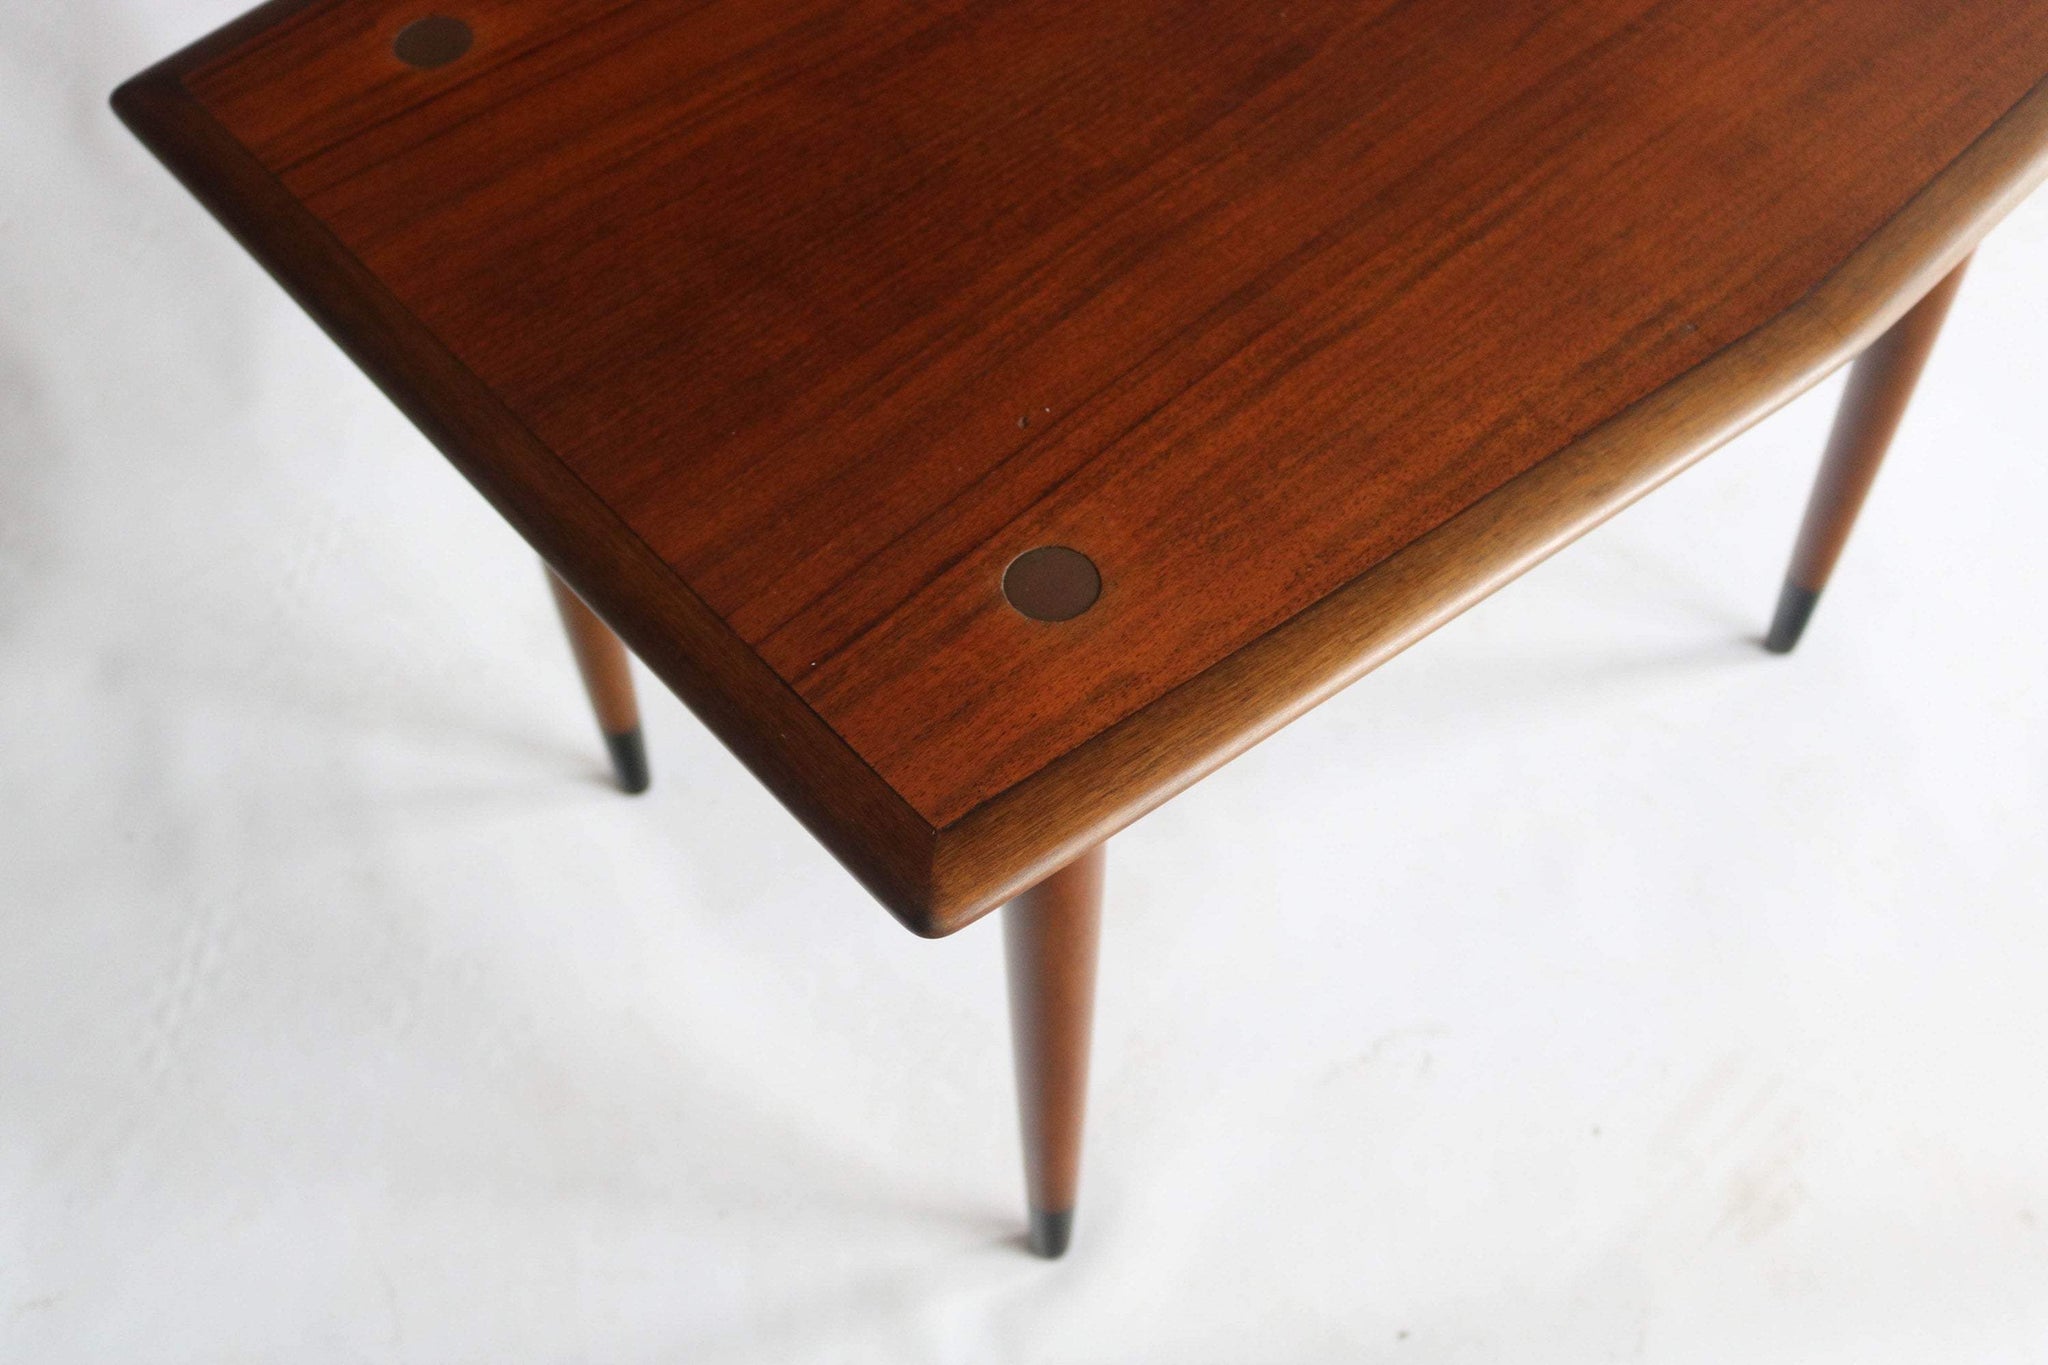 60s end table